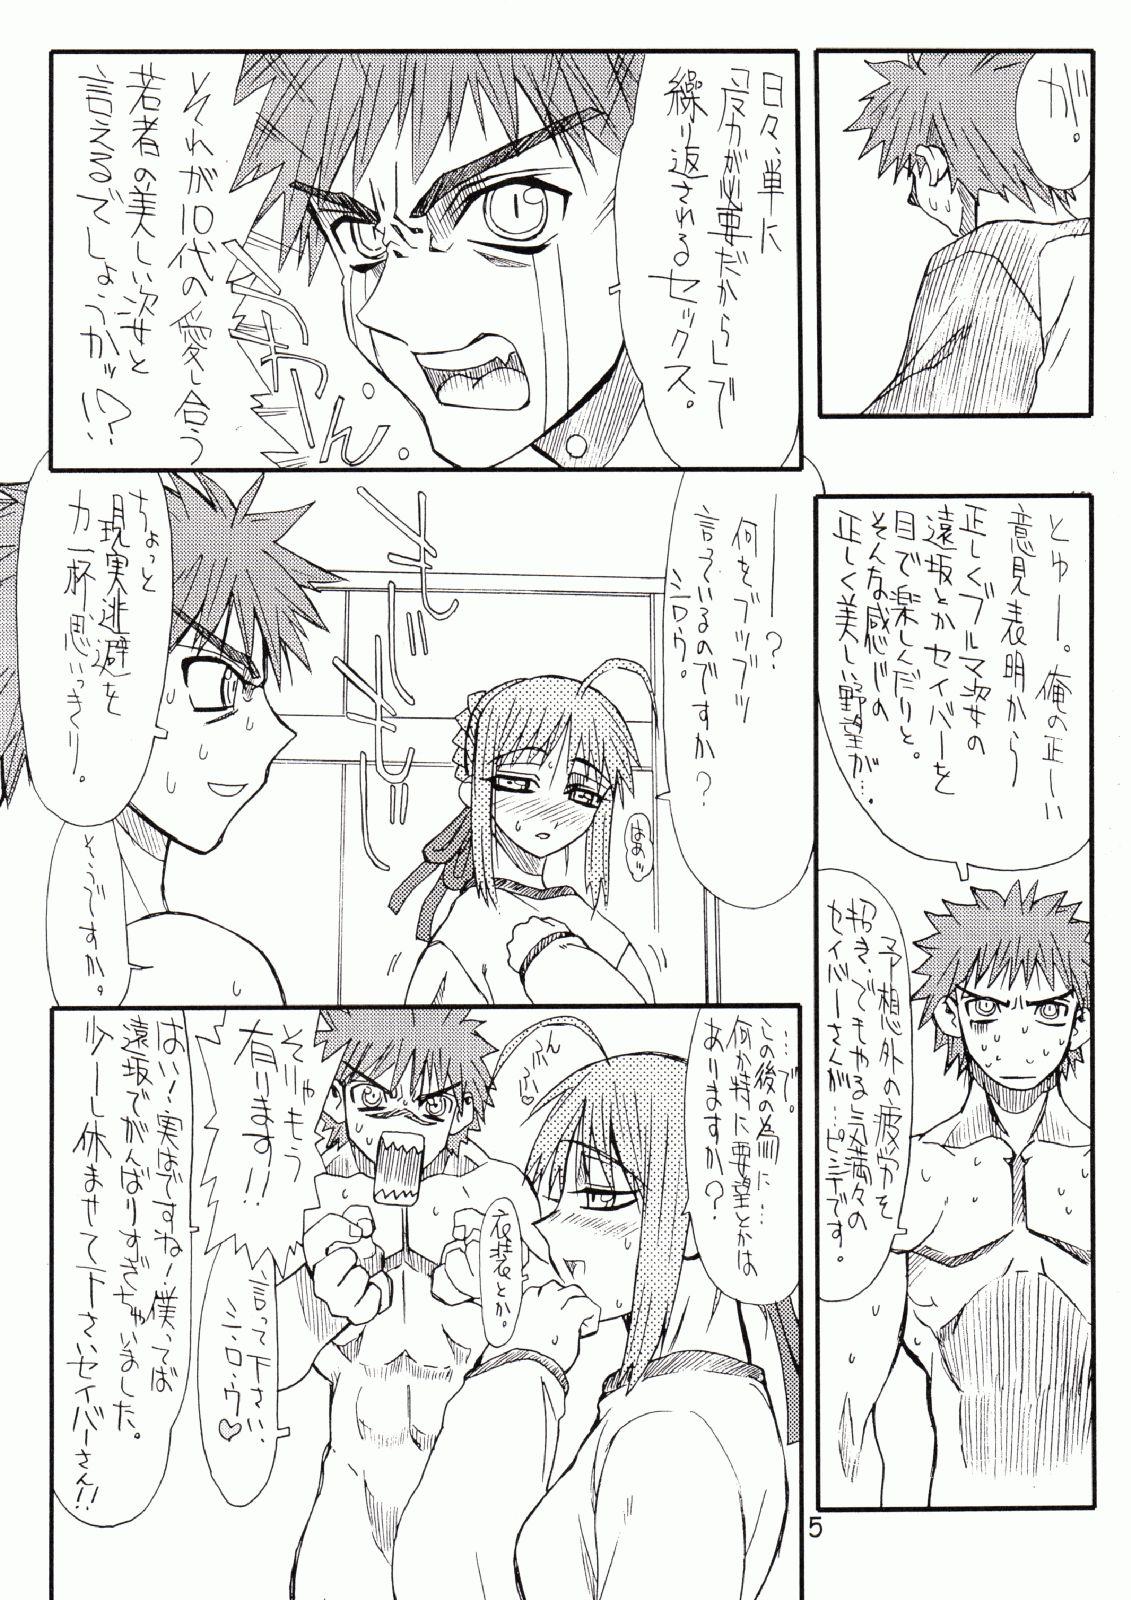 Bisexual Corn 2 - Fate stay night Stockings - Page 4